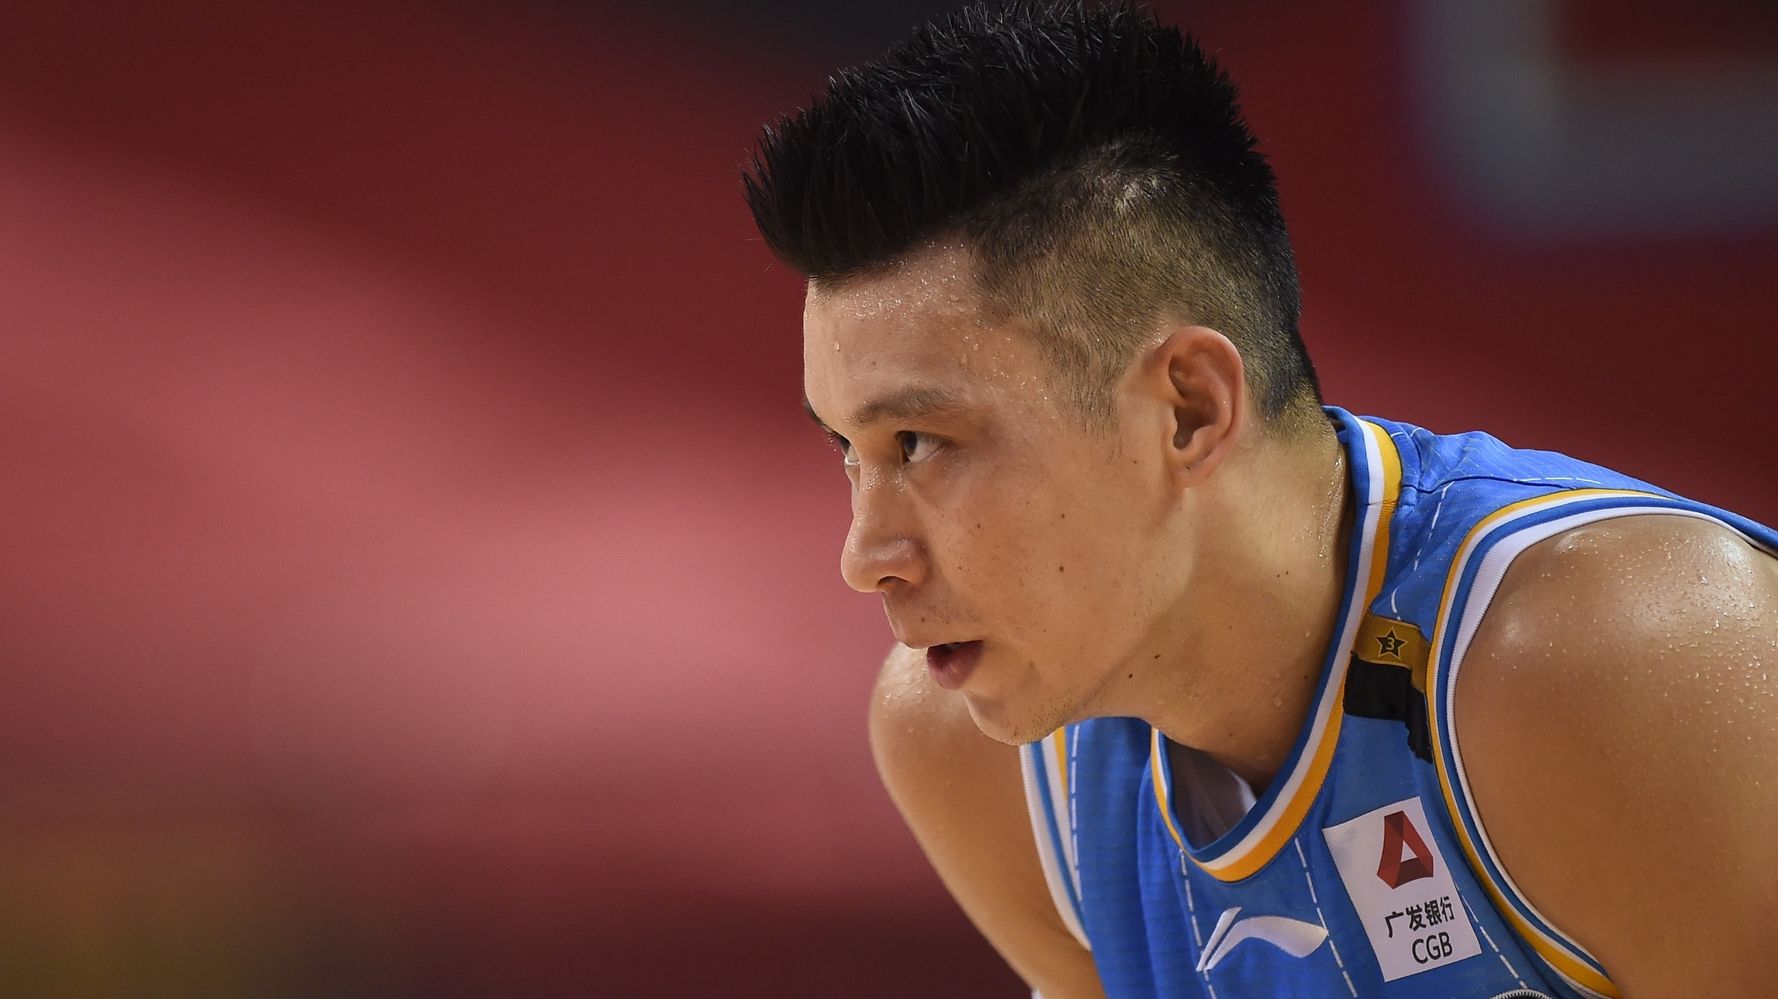 Basketball officials have investigated the complaint that Jeremy Lin was named “Coronavirus” on the field